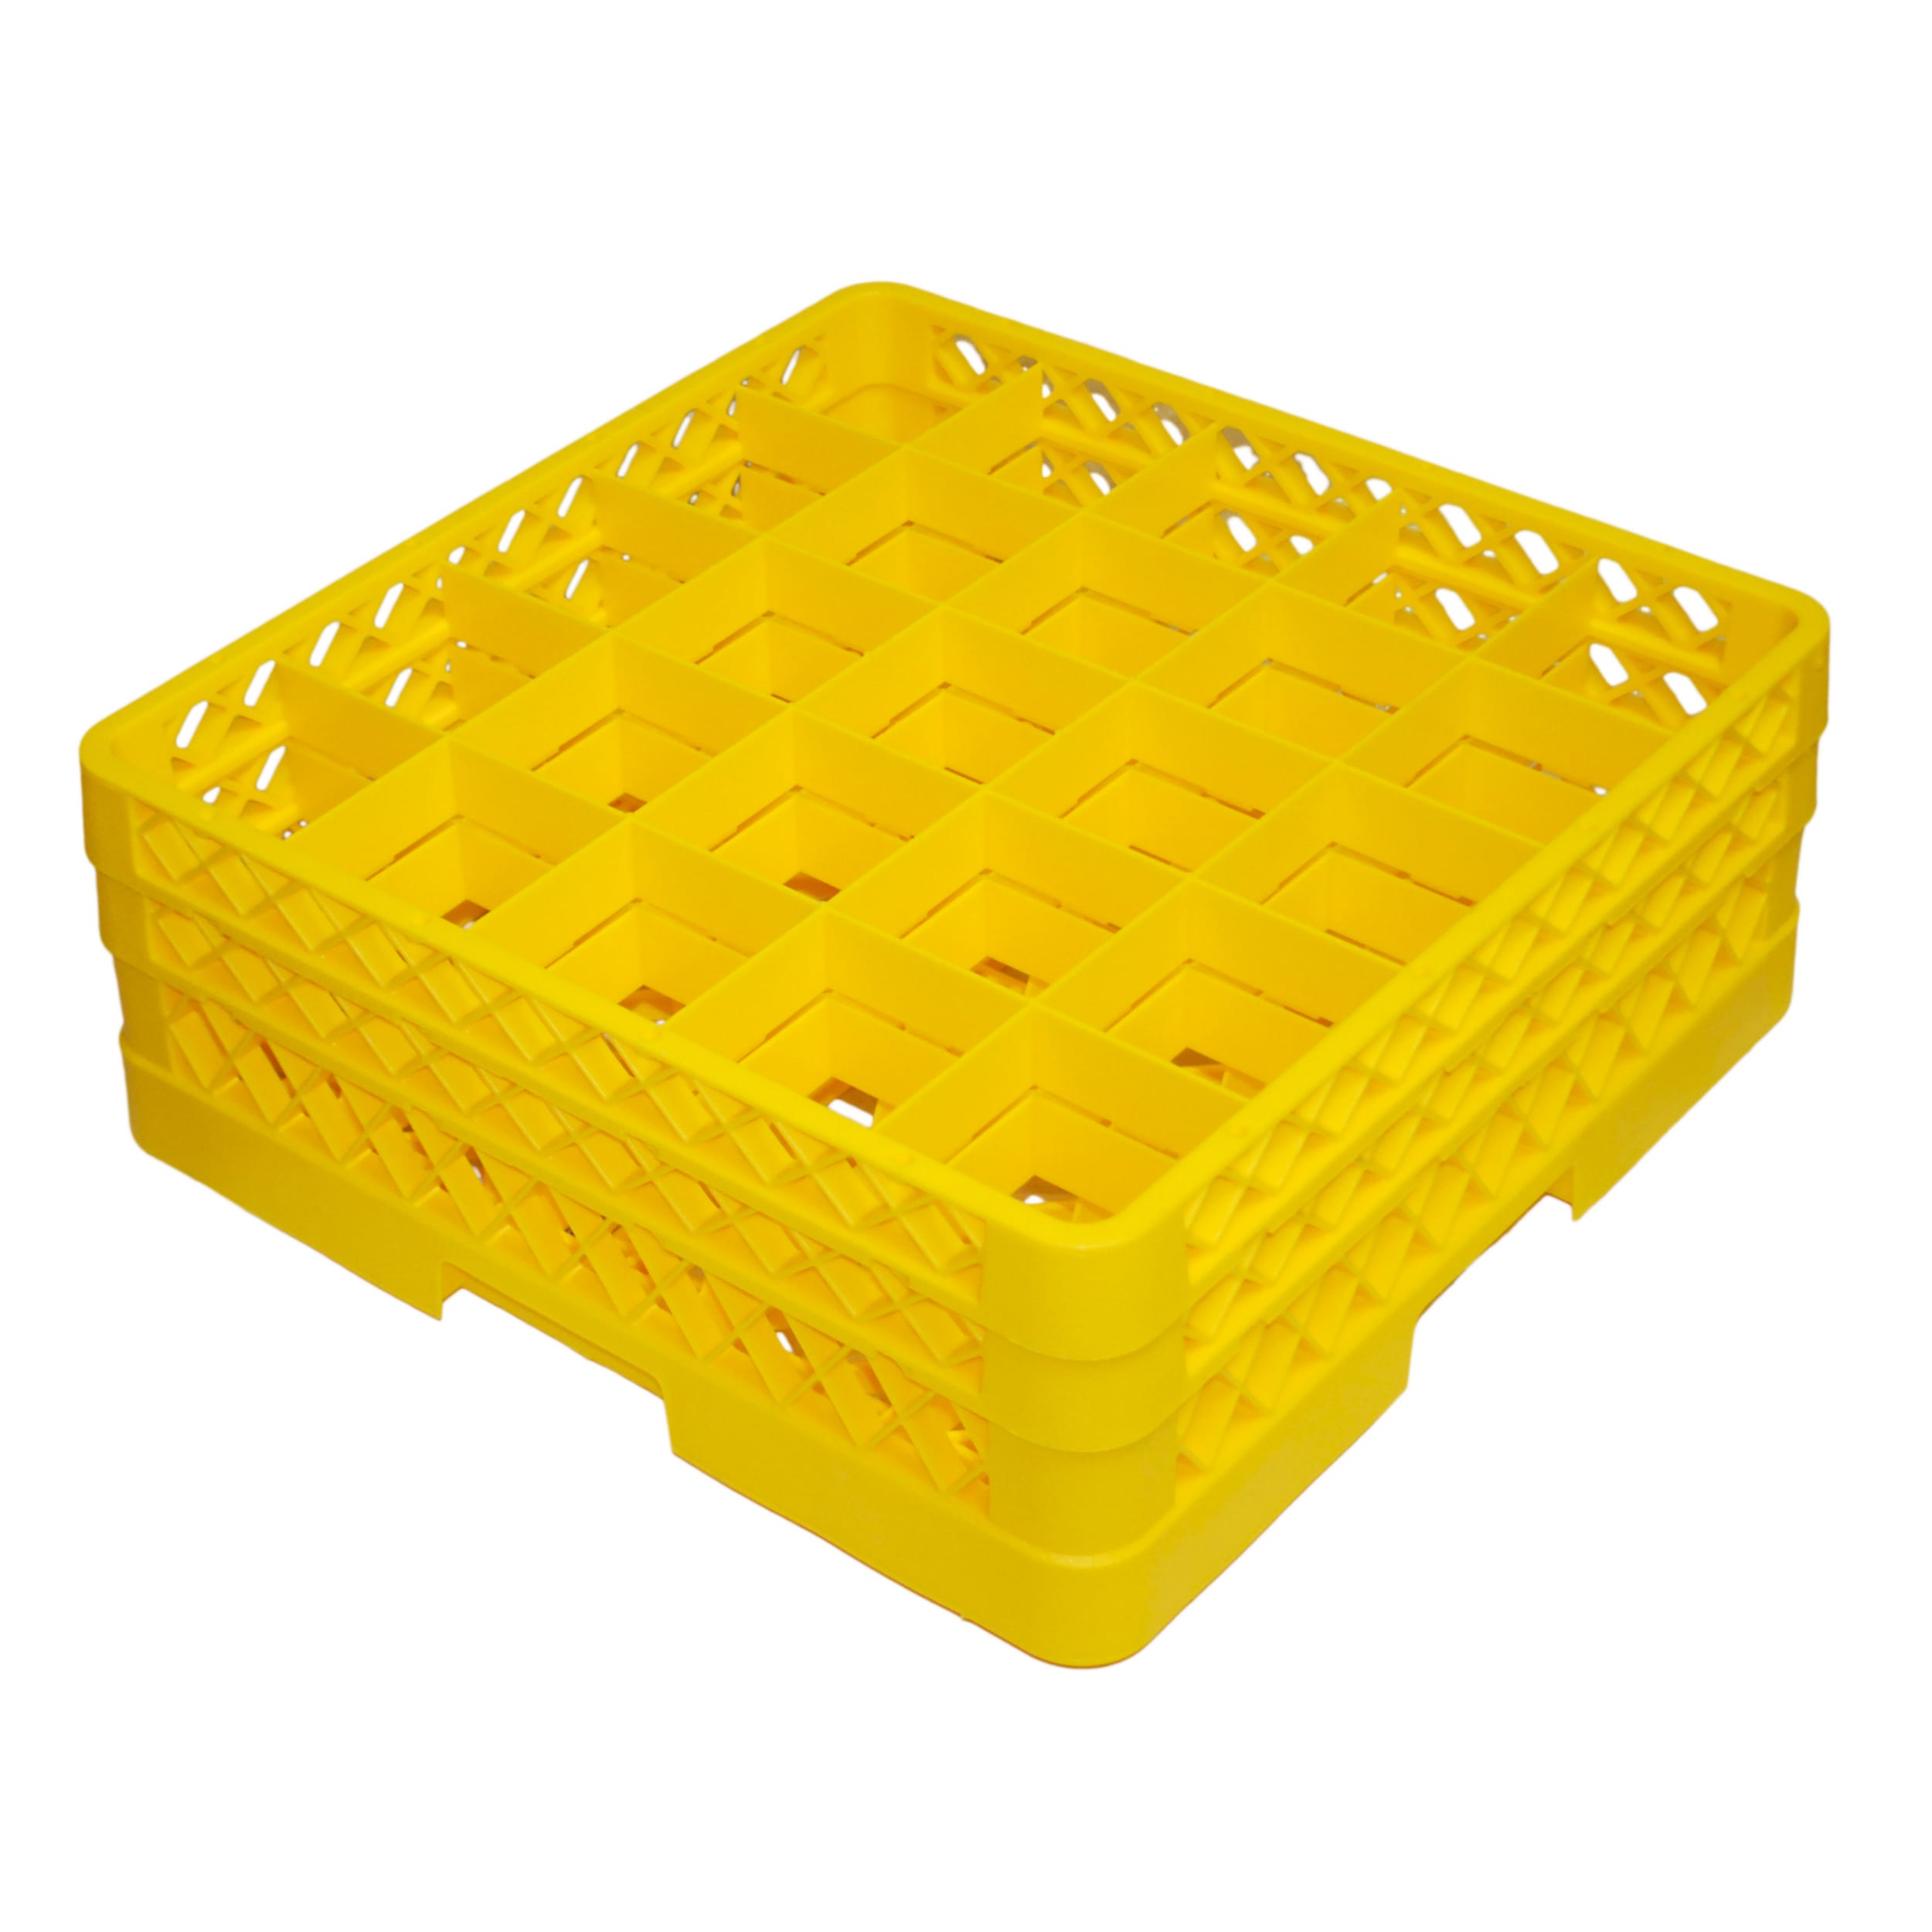 Traex TR6BB-08 Yellow 25 Compartment Glass Rack with 2 Extenders